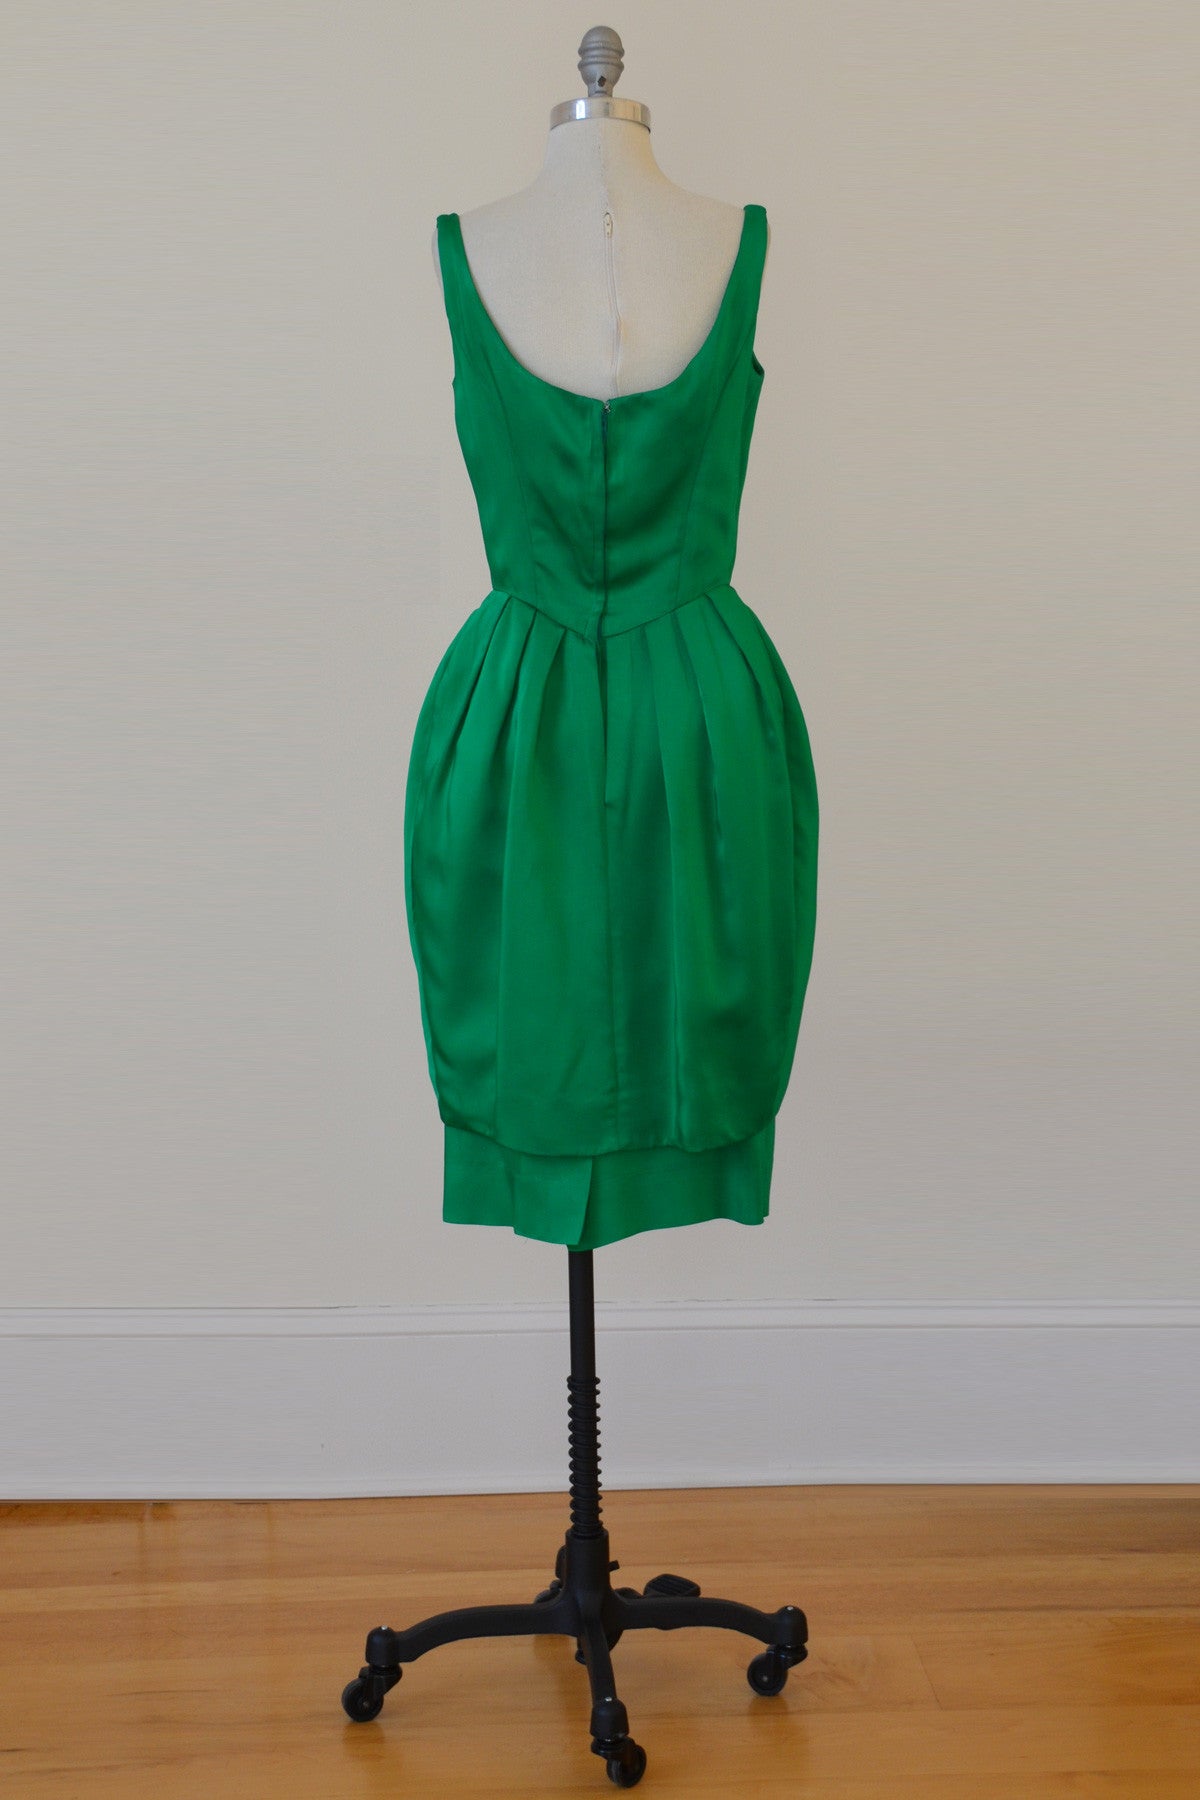 1960's Emerald Green Satin Bombshell Vintage Party Dress with Petal Sk ...